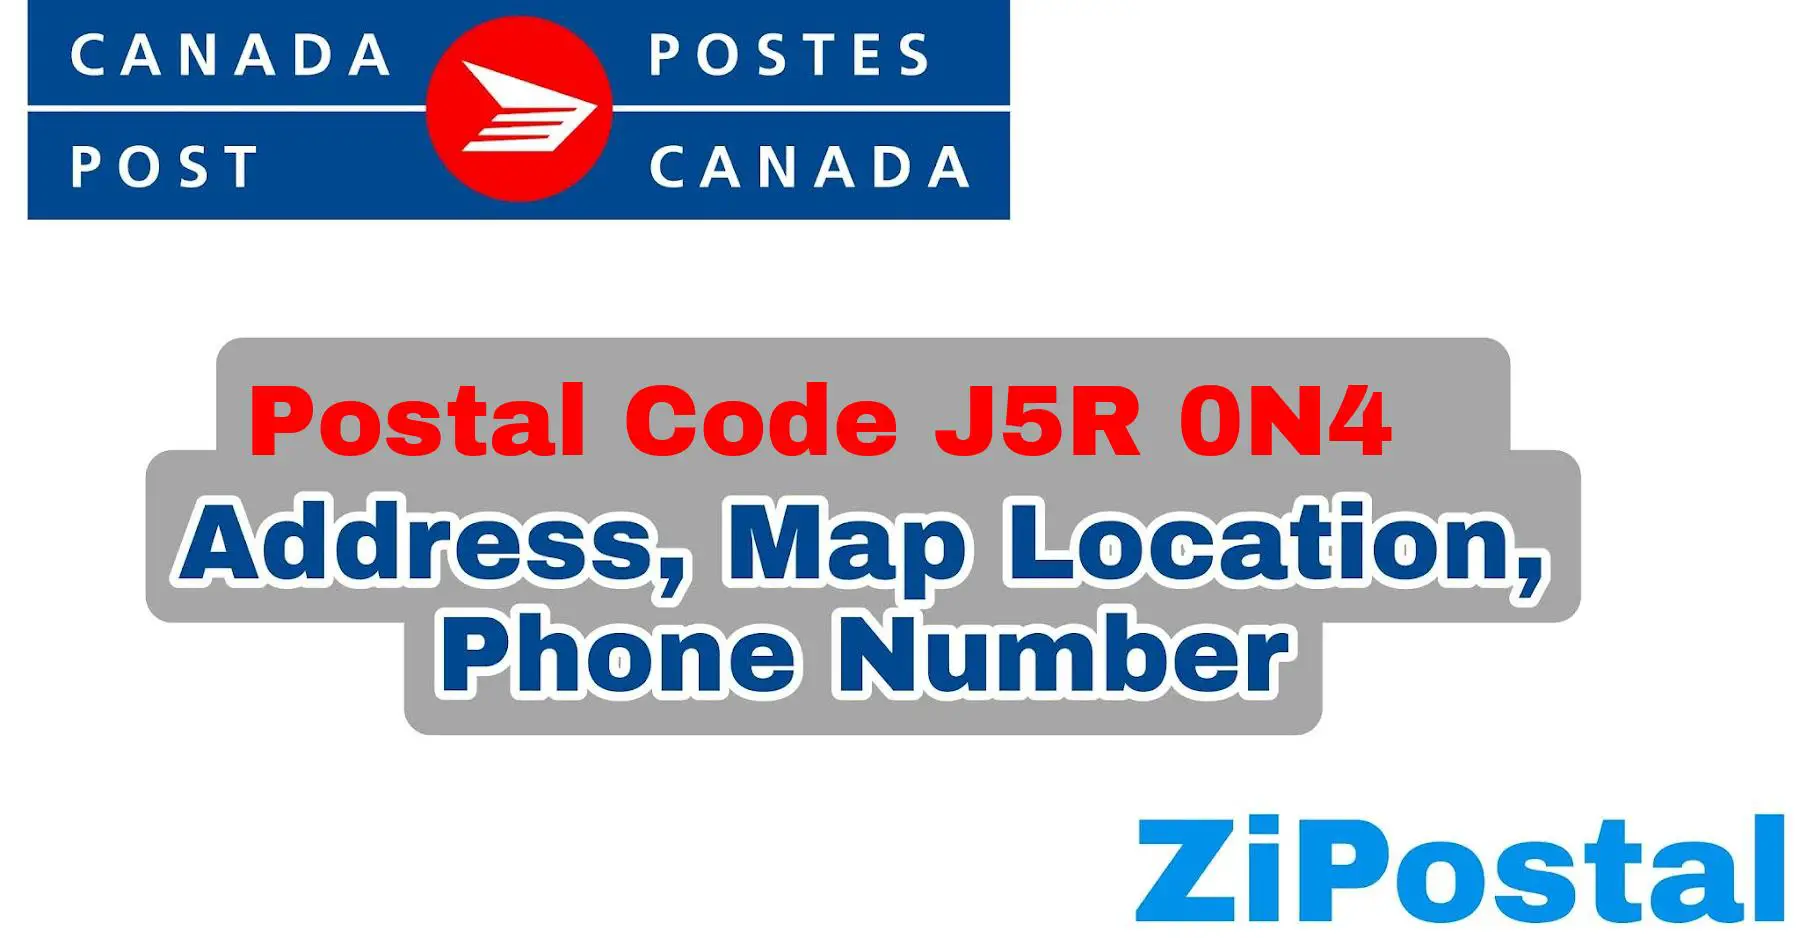 Postal Code J5R 0N4 Address Map Location and Phone Number